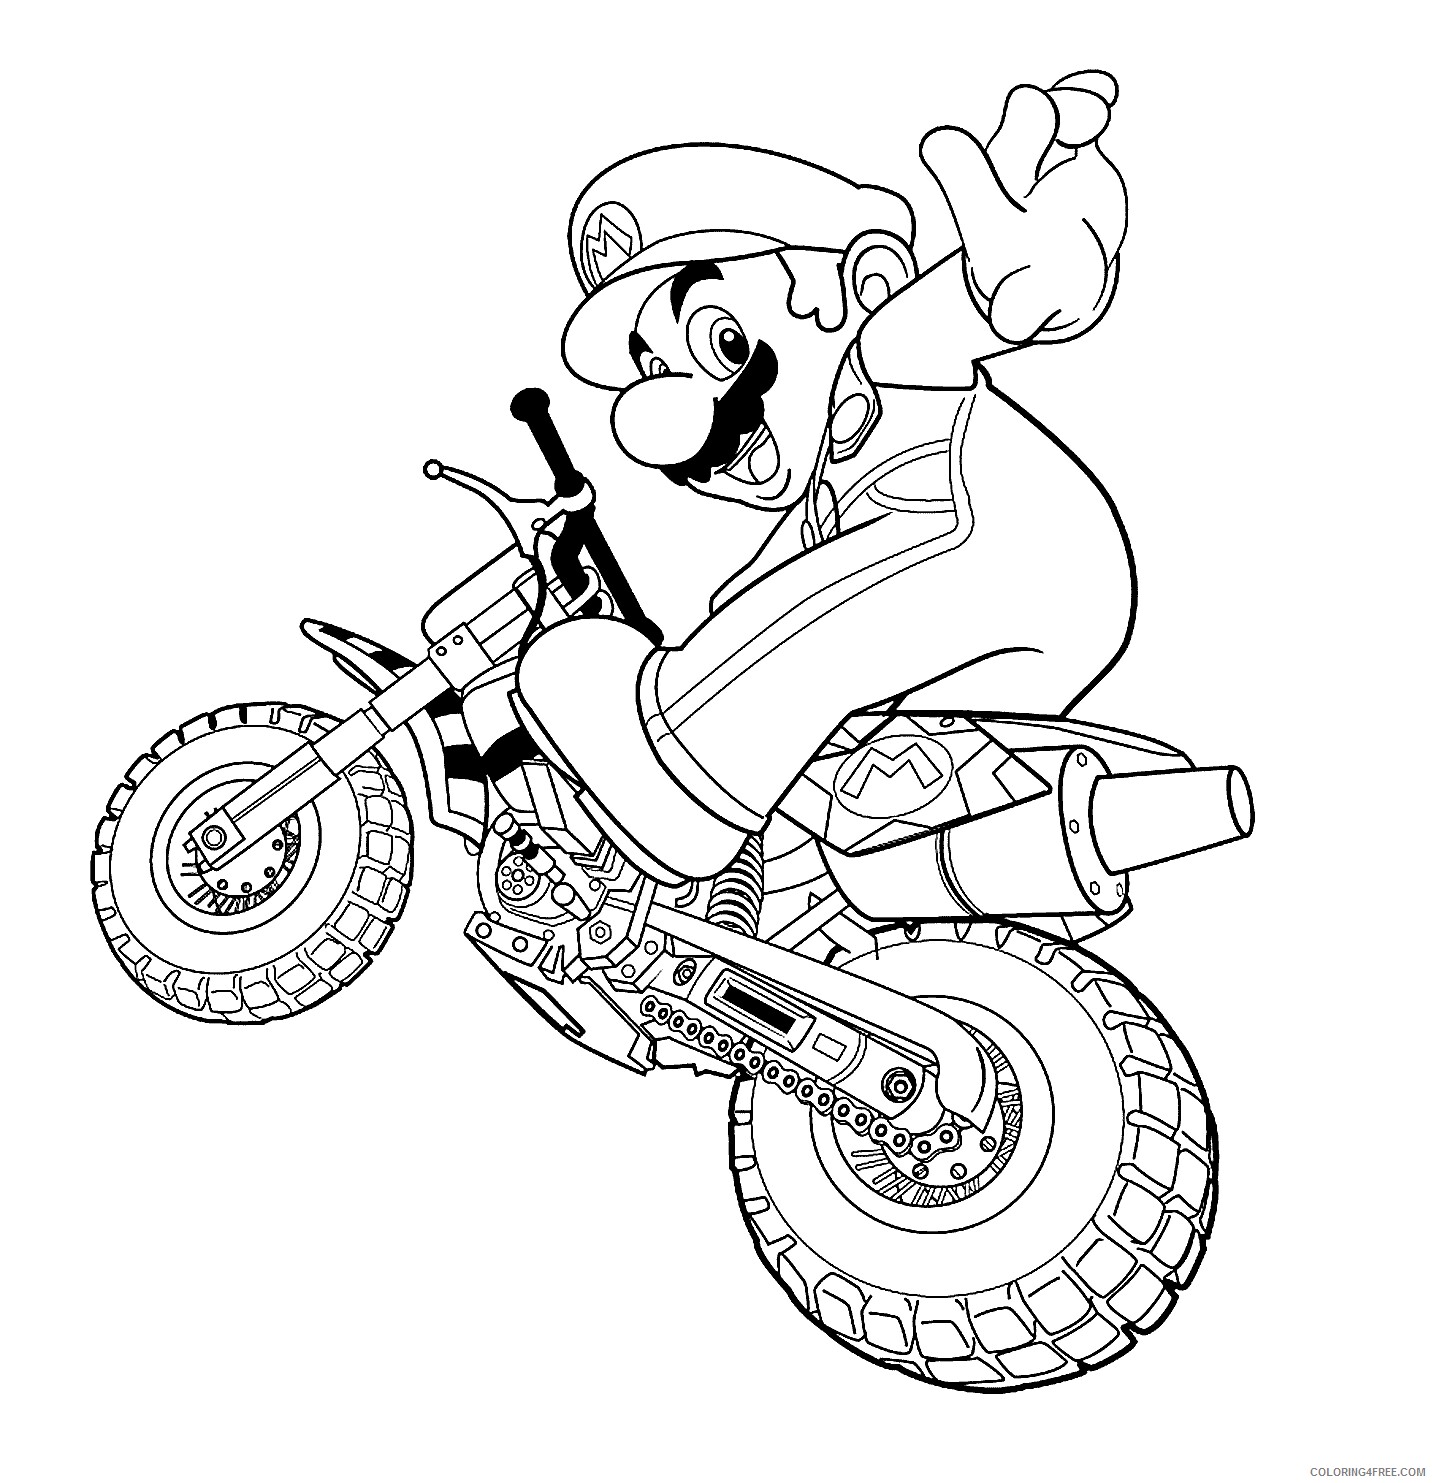 Super Mario Coloring Pages Games mario for kids dirt bike Printable 2021 1142 Coloring4free